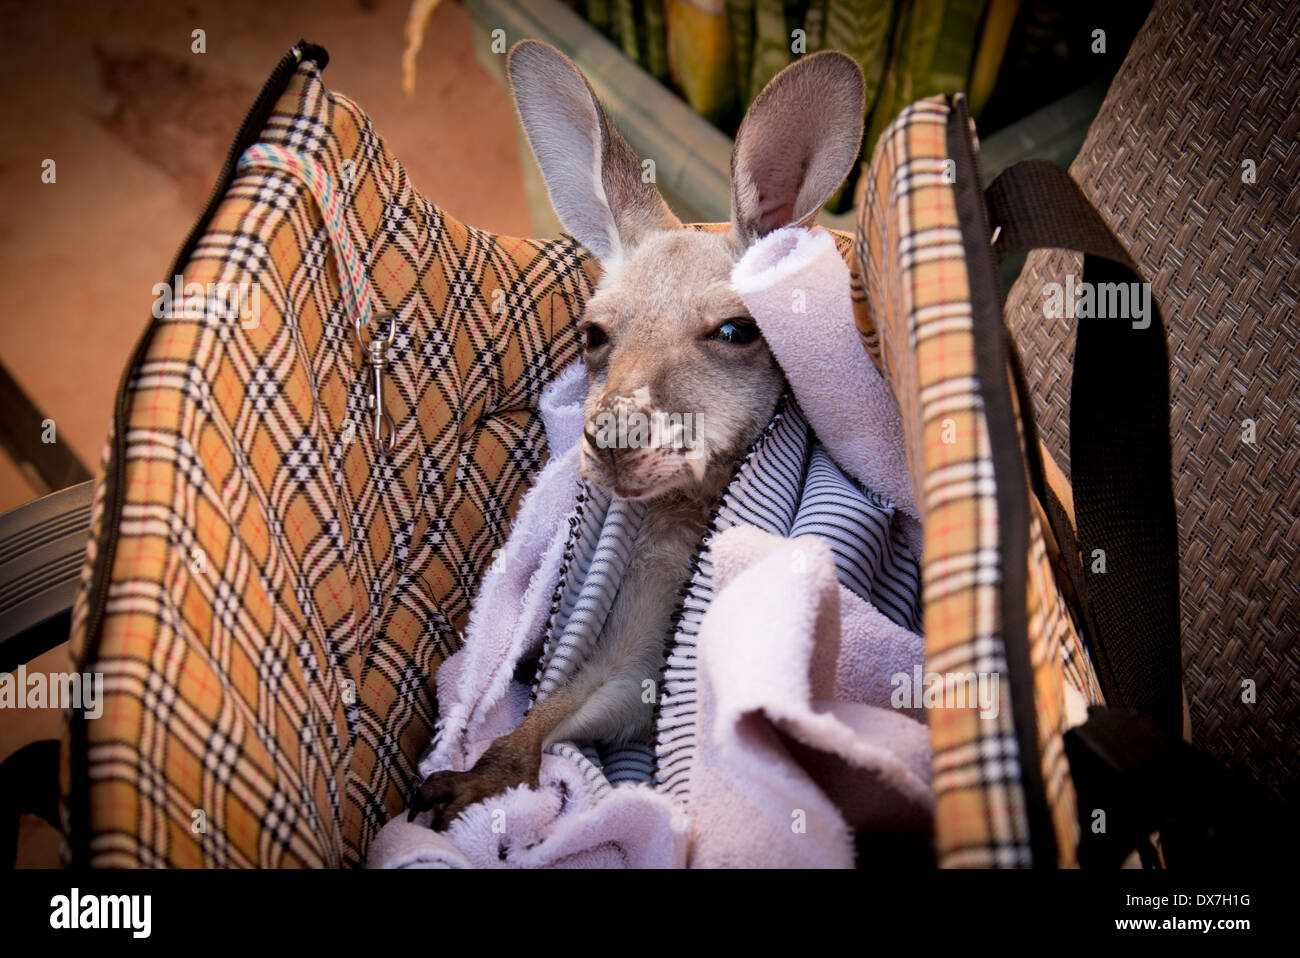 Adopted little joey in pouch and bag Stock Photo